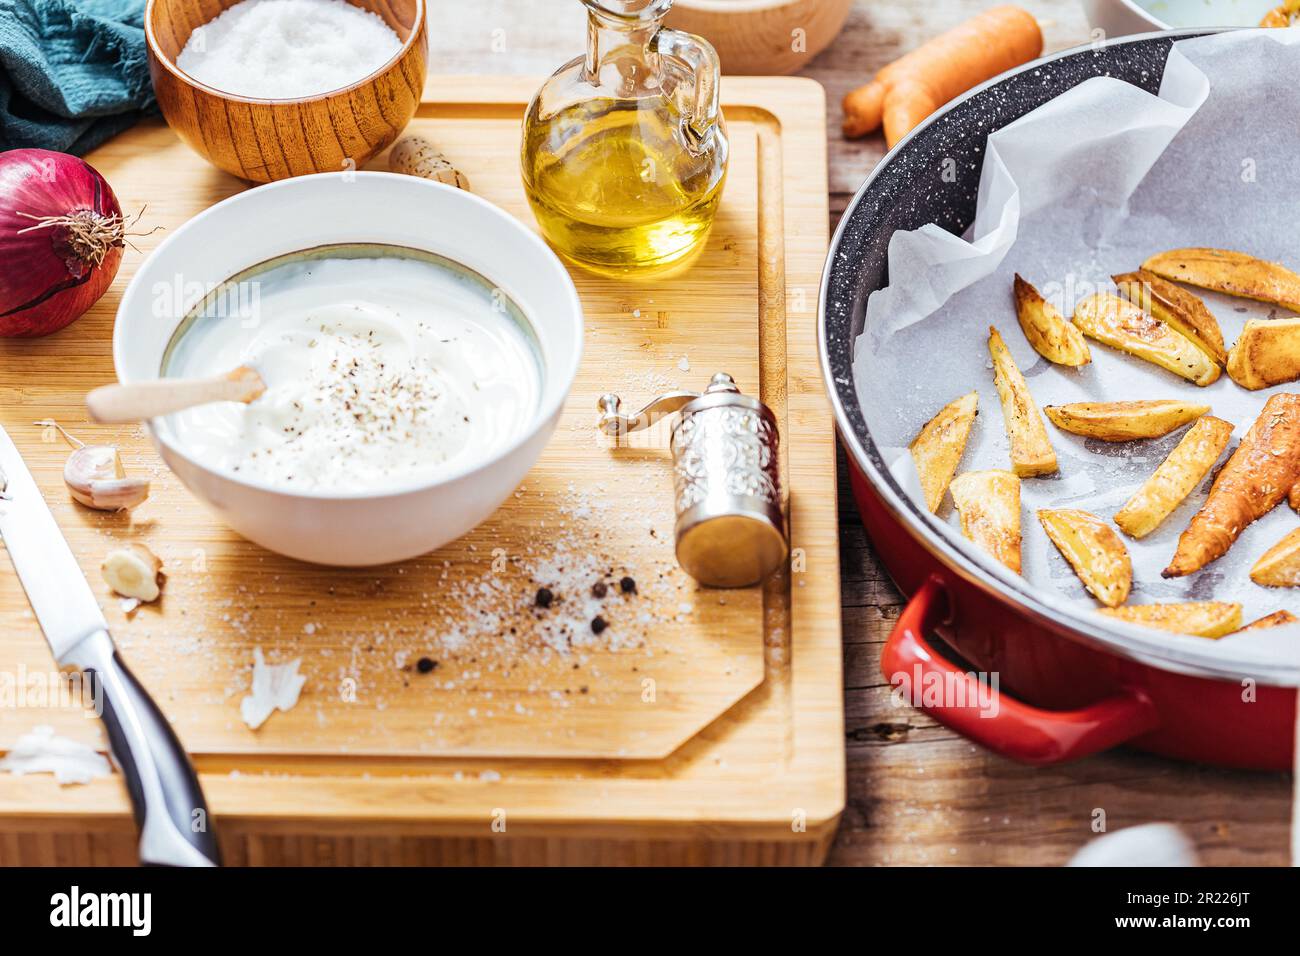 Baking Pan Filled with Roast Potatoes or Baked French Fries in Messy Working Kitchen with a Bowl of Yogurt Sauce, Olive Oil, Garlic and Spices and Con Stock Photo